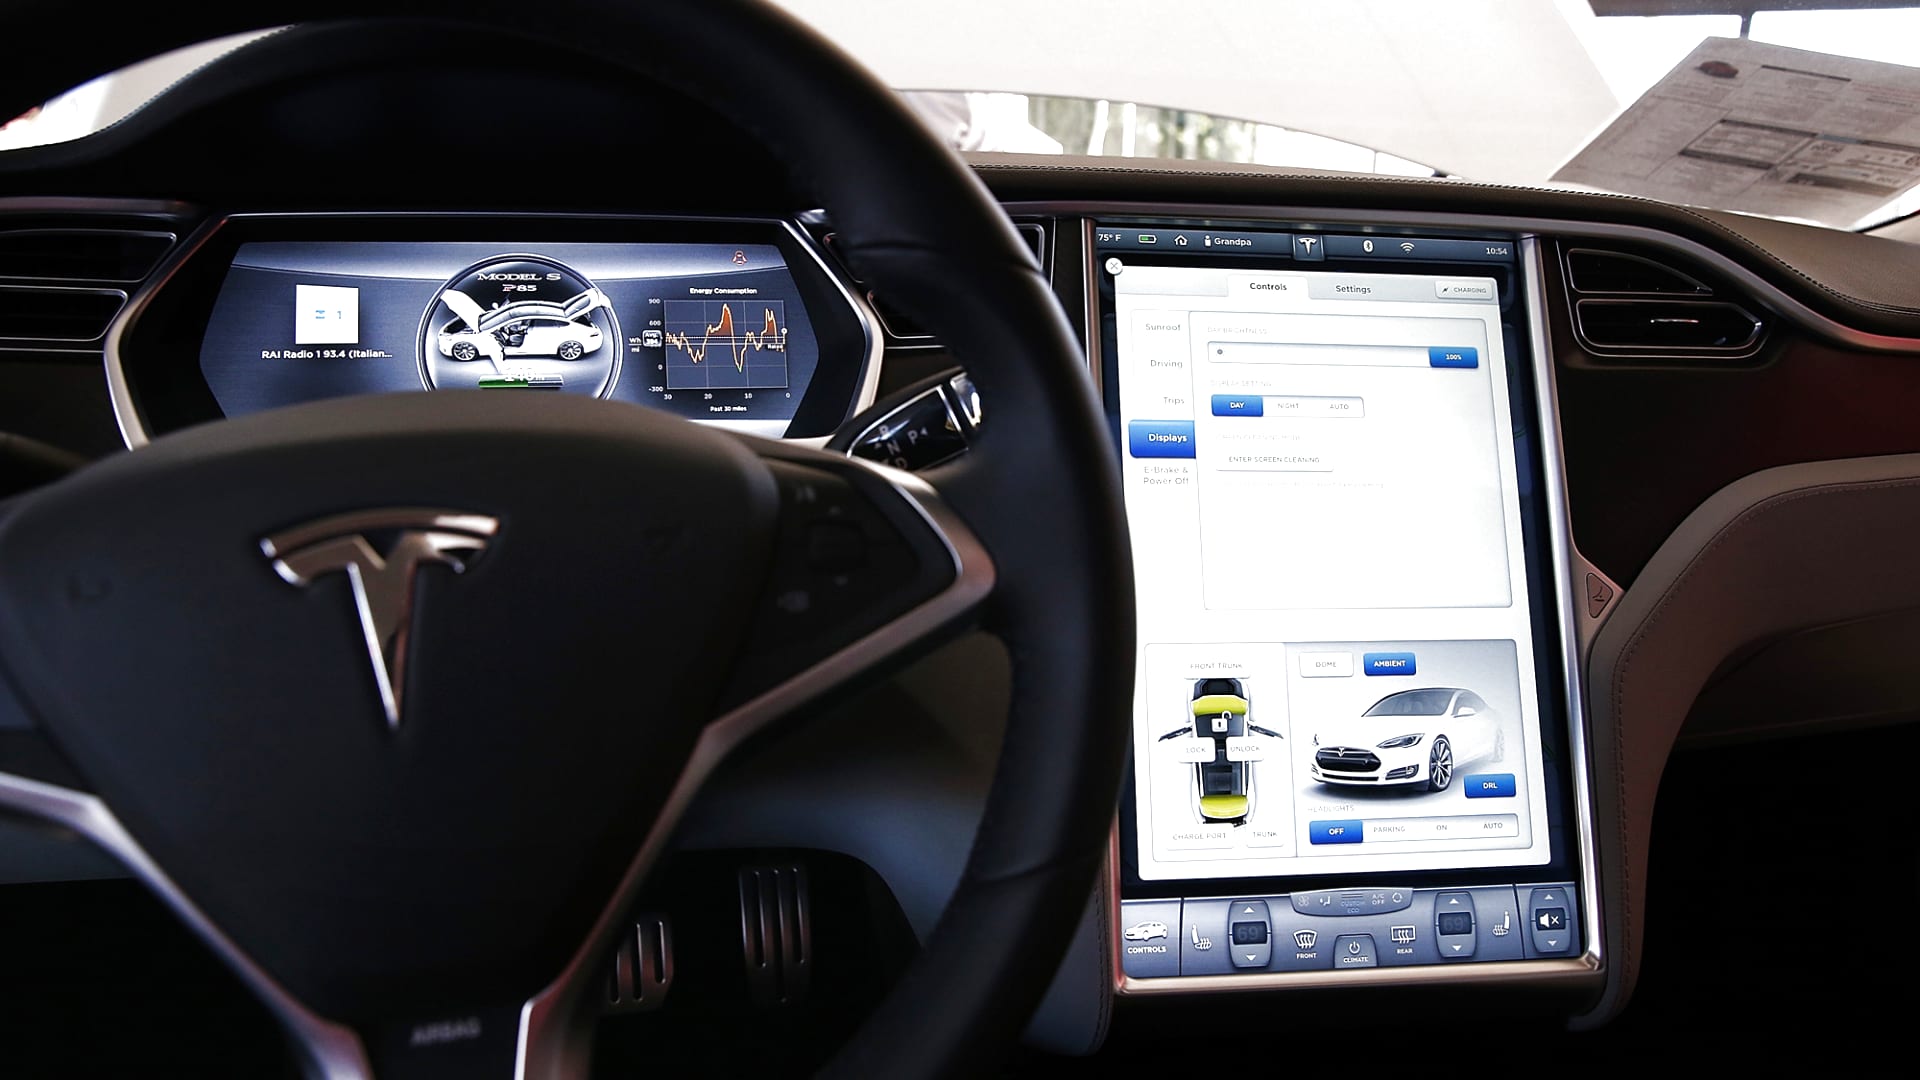 Tesla's plan to leave auto industry behind on in-car entertainment